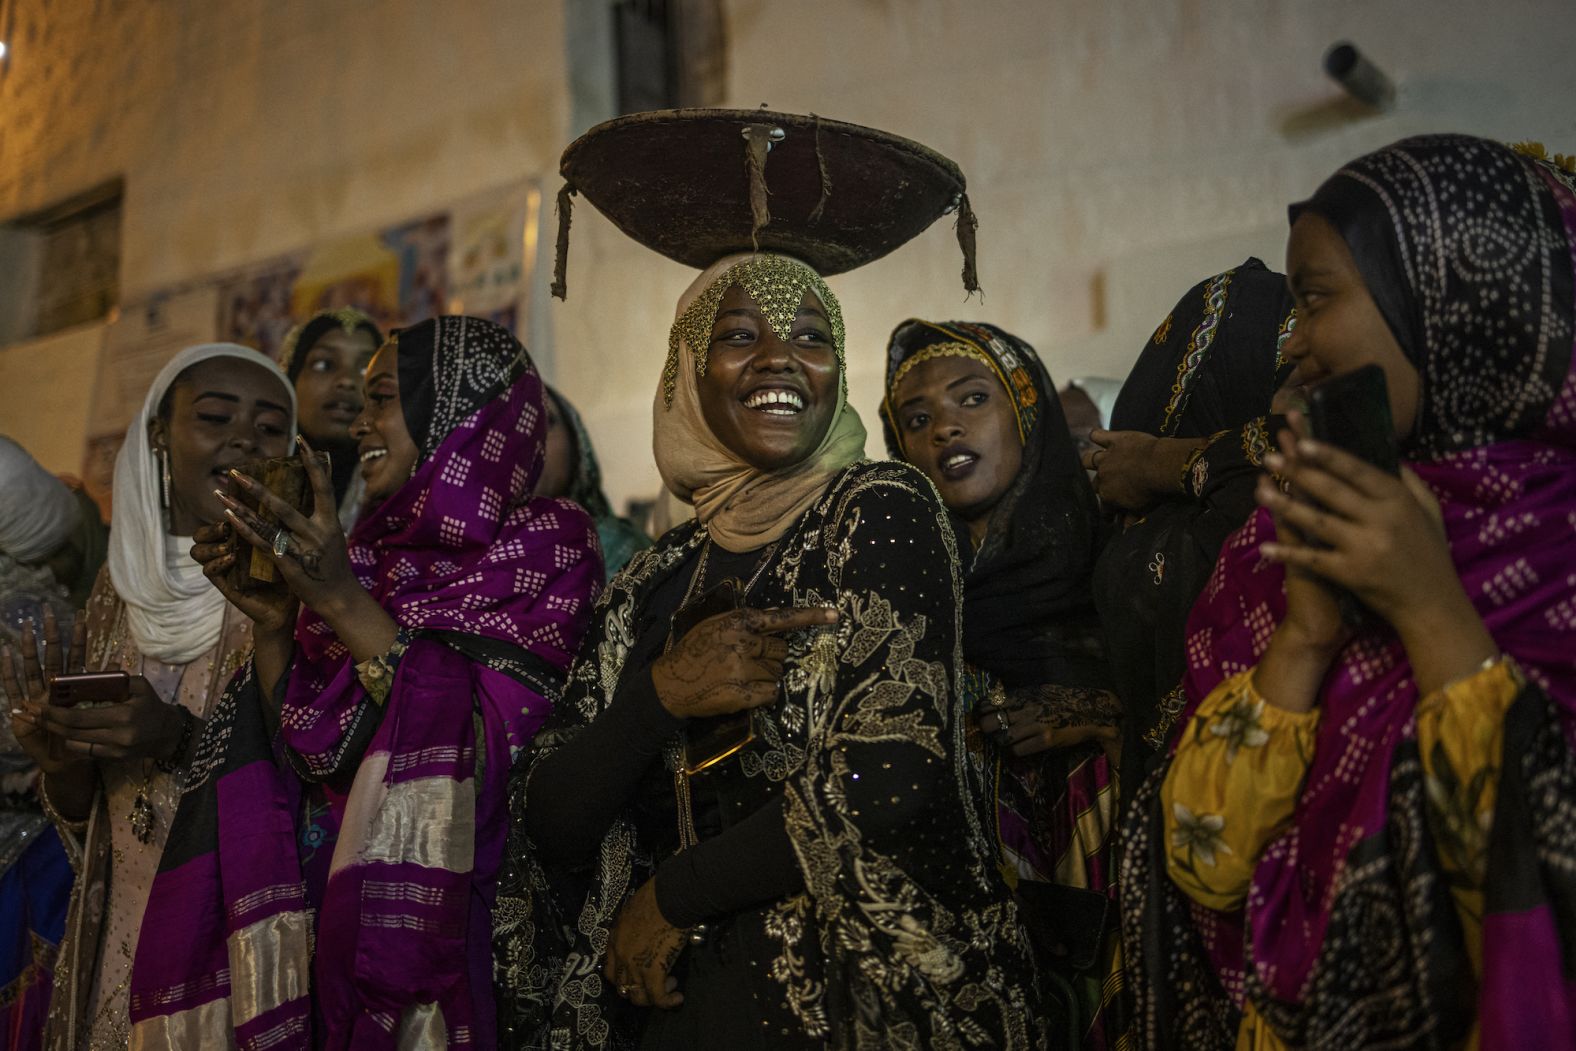 Young women dressed in traditional attire sing and dance during the Shuwalid festival in Harar, Ethiopia, on Tuesday, April 16. Shuwalid is an annual festival celebrated by the Harari people of Ethiopia and marks the end of six days of fasting to compensate omissions during Ramadan.